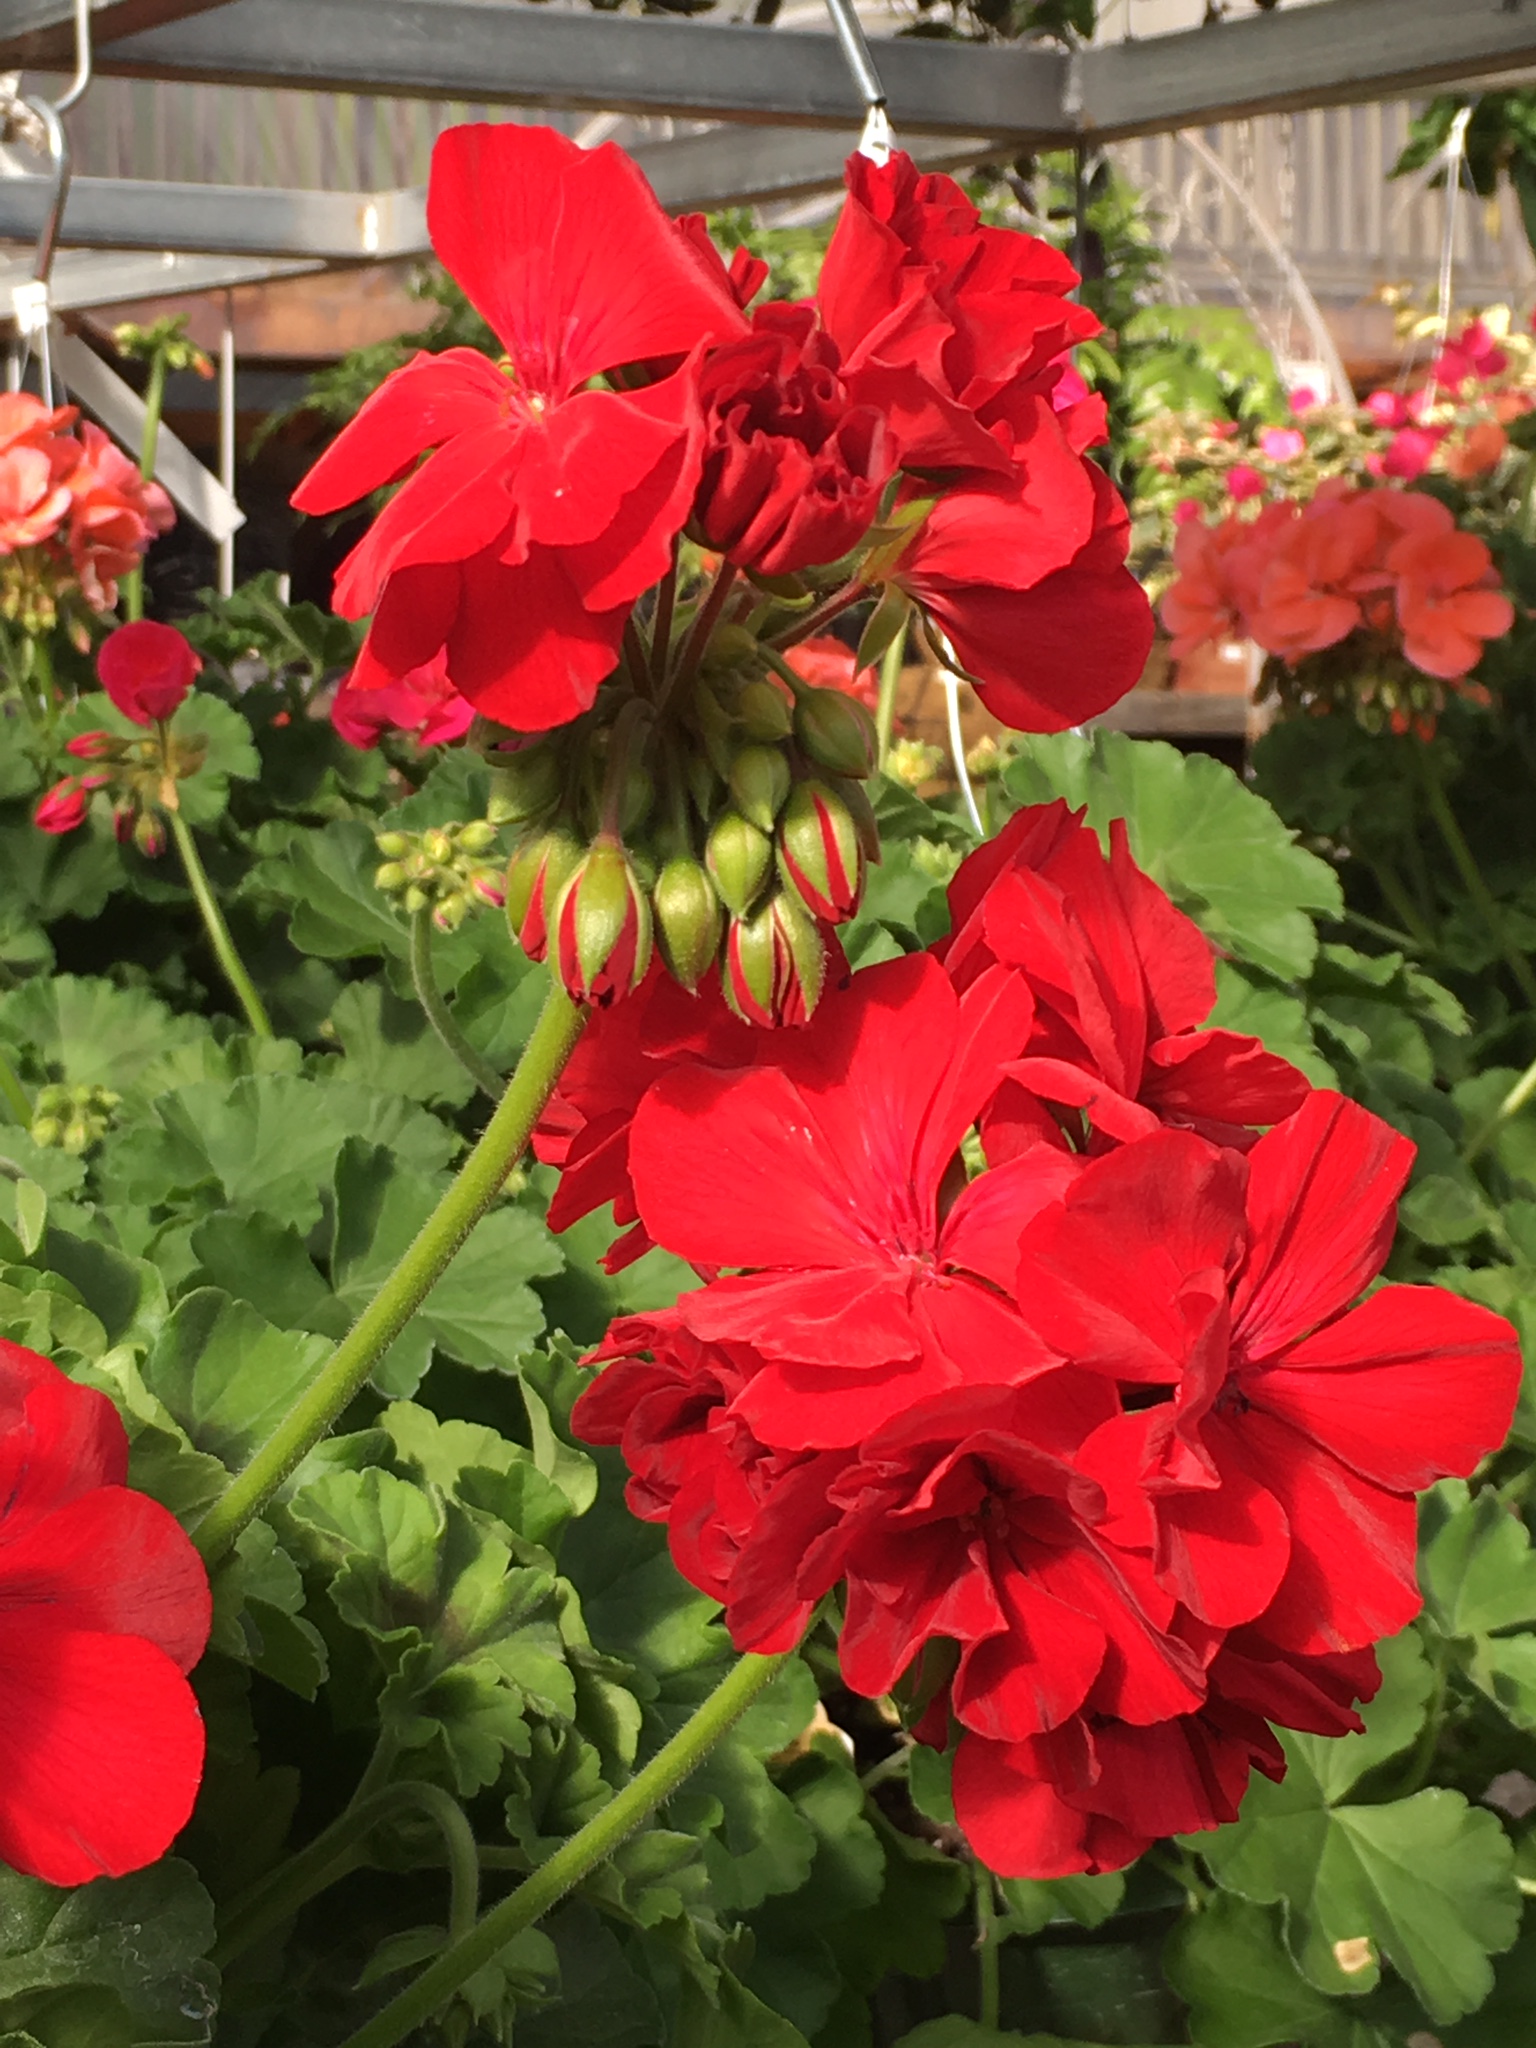 One of the most beloved annuals., bold red, geraniums, are hard to beat. Drought tolerant, showy, and strong bloomers, these annuals give a big pop of color all season.